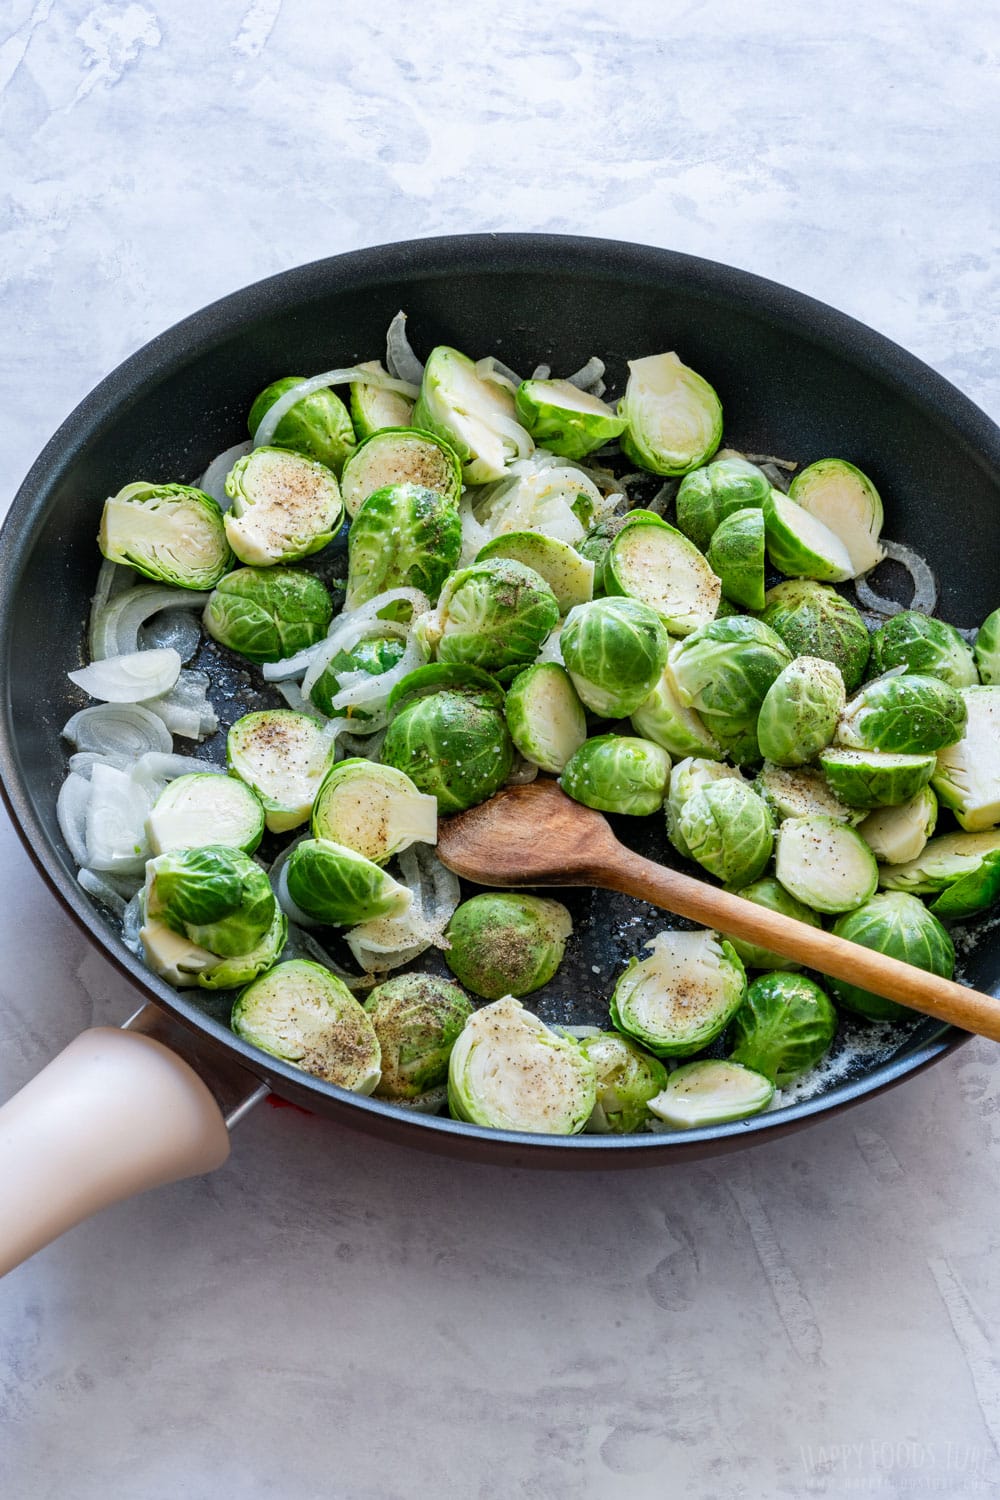 Cooking Brussels sprouts and onions on the skillet.